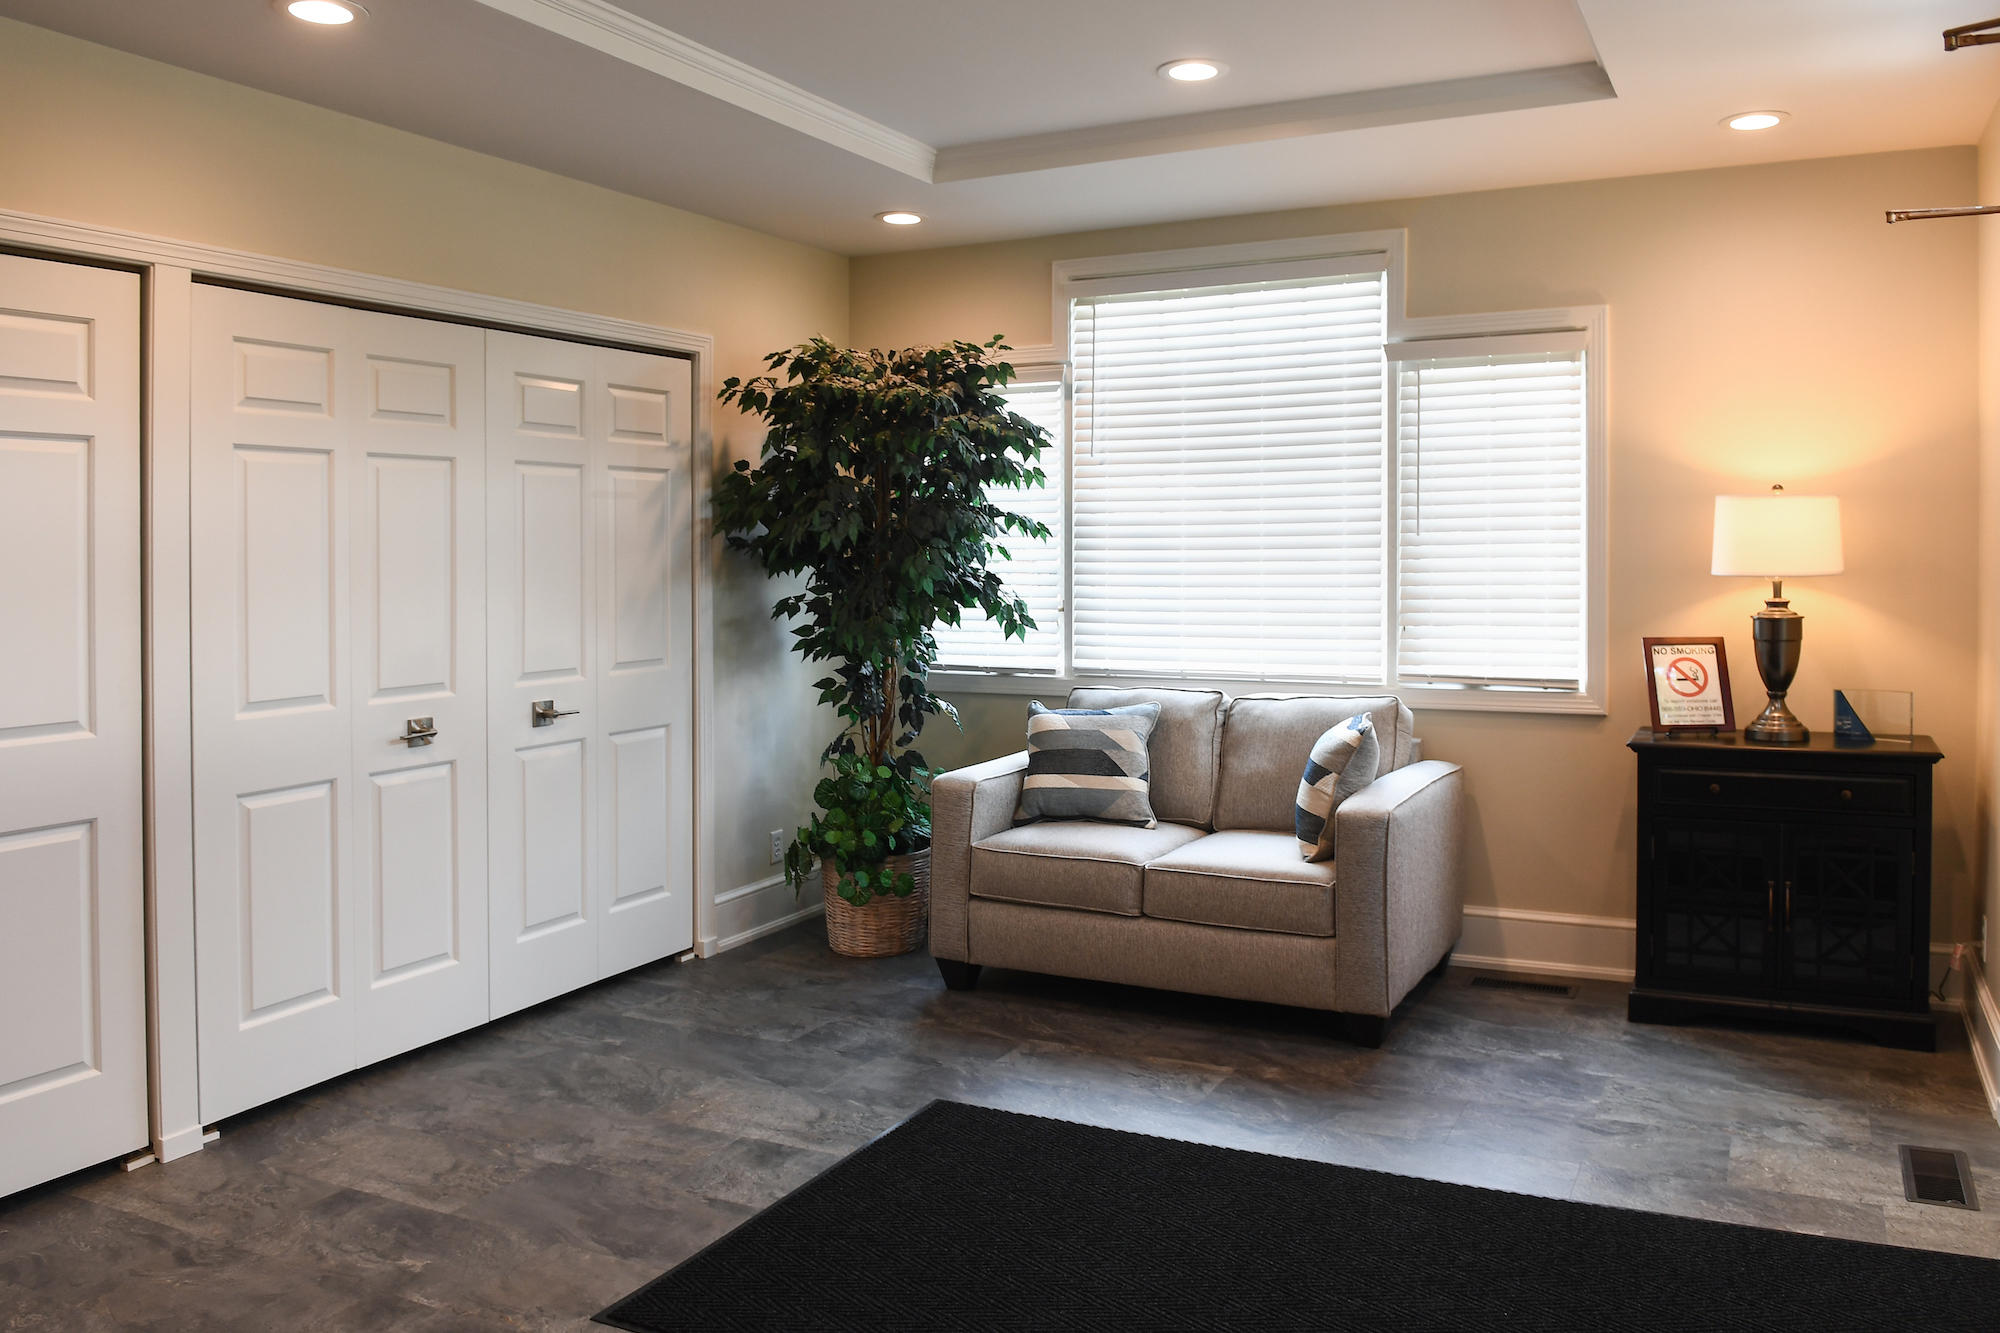 Our funeral home in Cuyahoga Falls, Ohio is well-appointed and recently renovated.